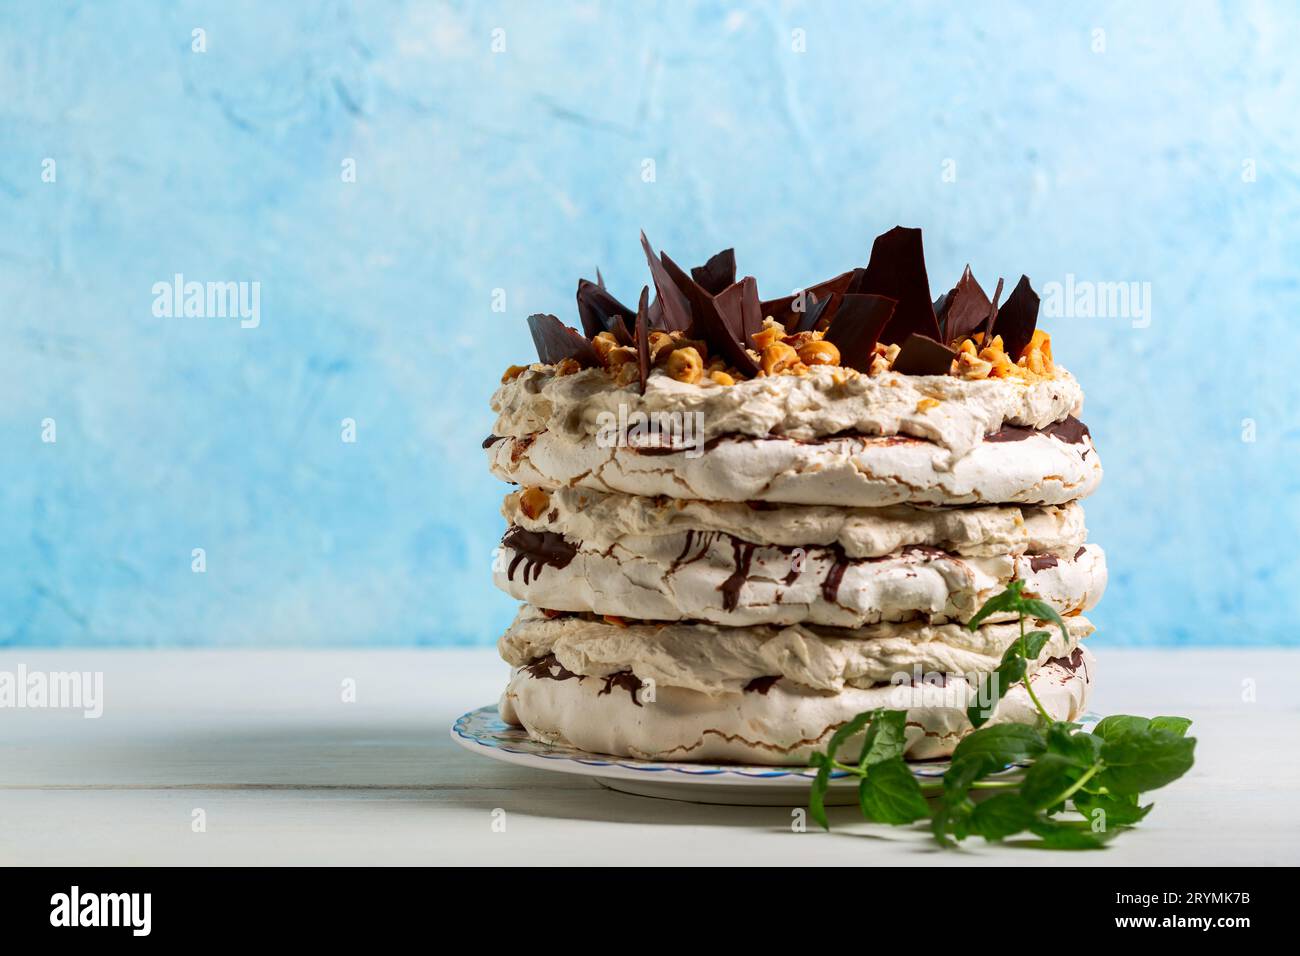 Meringue cake with butter cream, hazelnuts and chocolate. Stock Photo